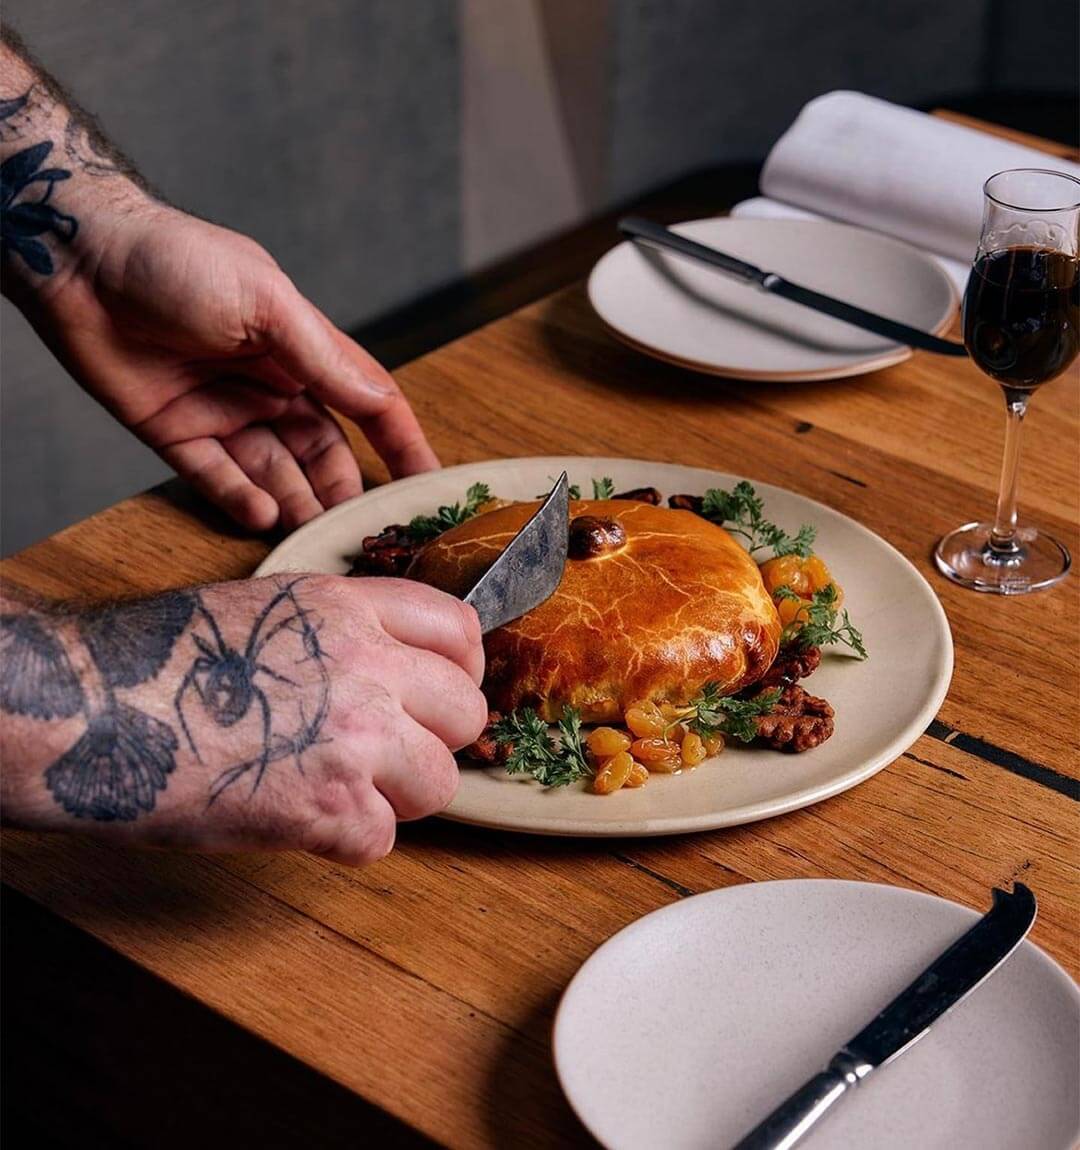 Delicious baked cheese dish at a fine dining restaurant in Healesville, presented by a chef with tattoos on his arms.